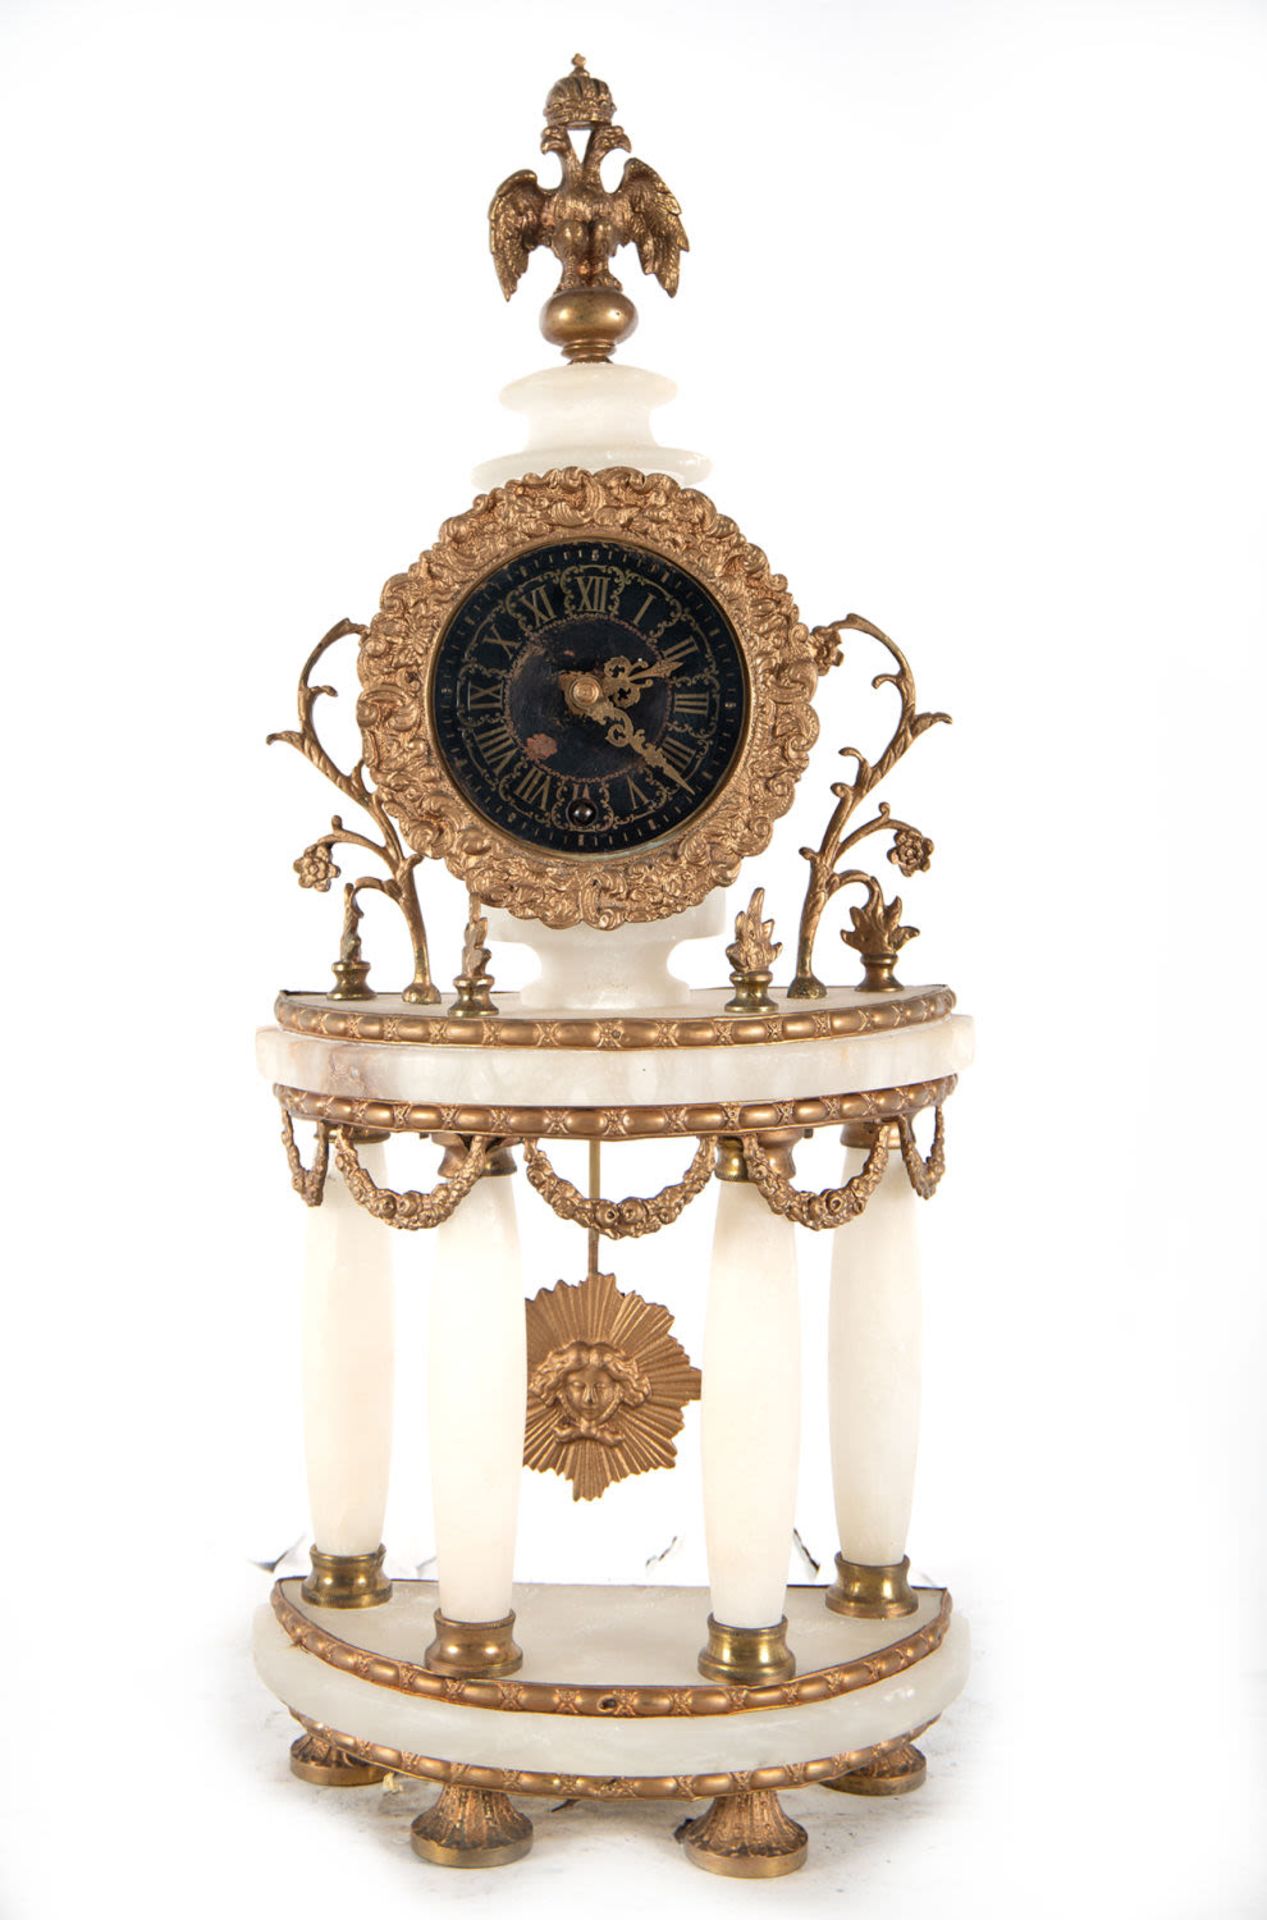 Napoleon III style clock in alabaster and calamine, late 19th century